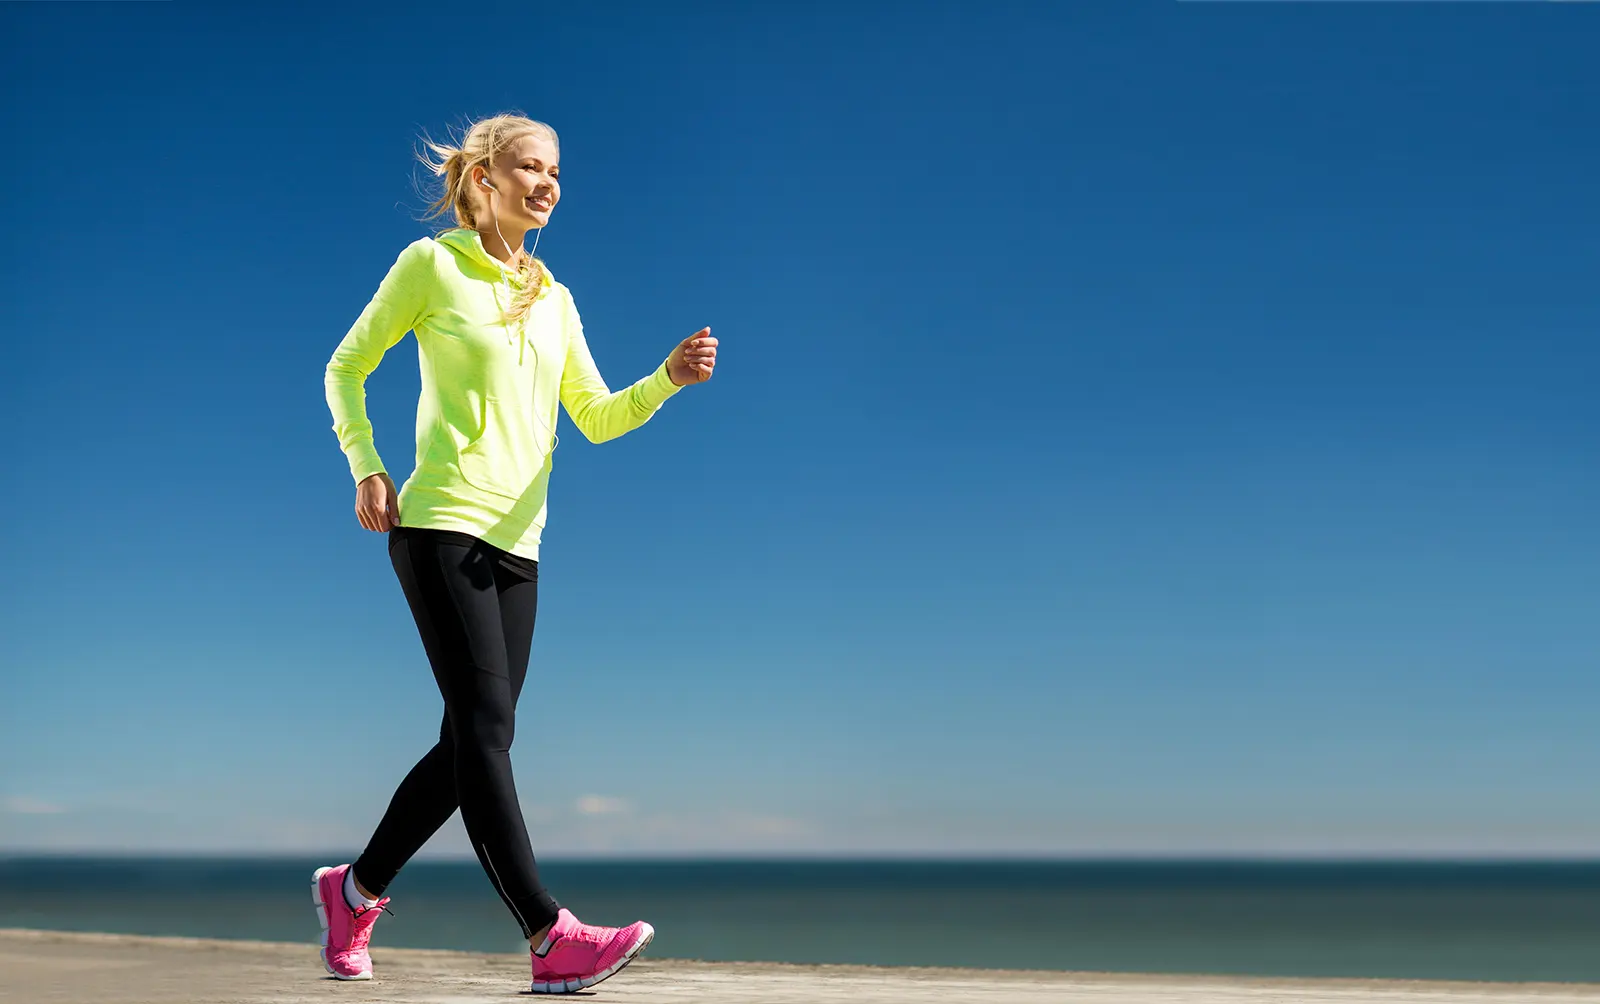 Brisk Walking as an Exercise: What Are Its Benefits?